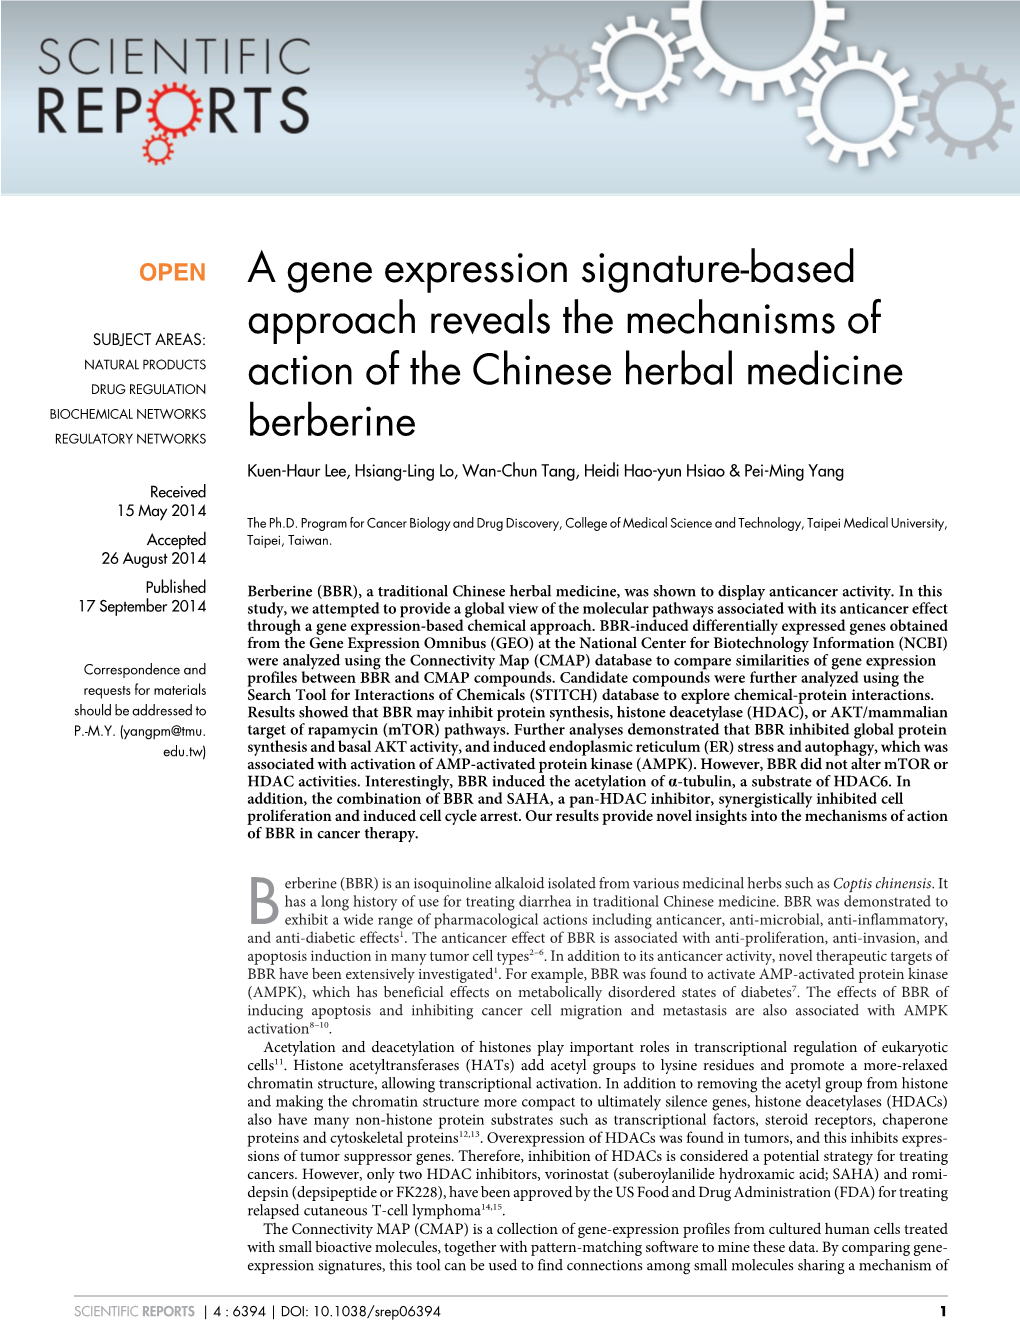 A Gene Expression Signature-Based Approach Reveals the Mechanisms